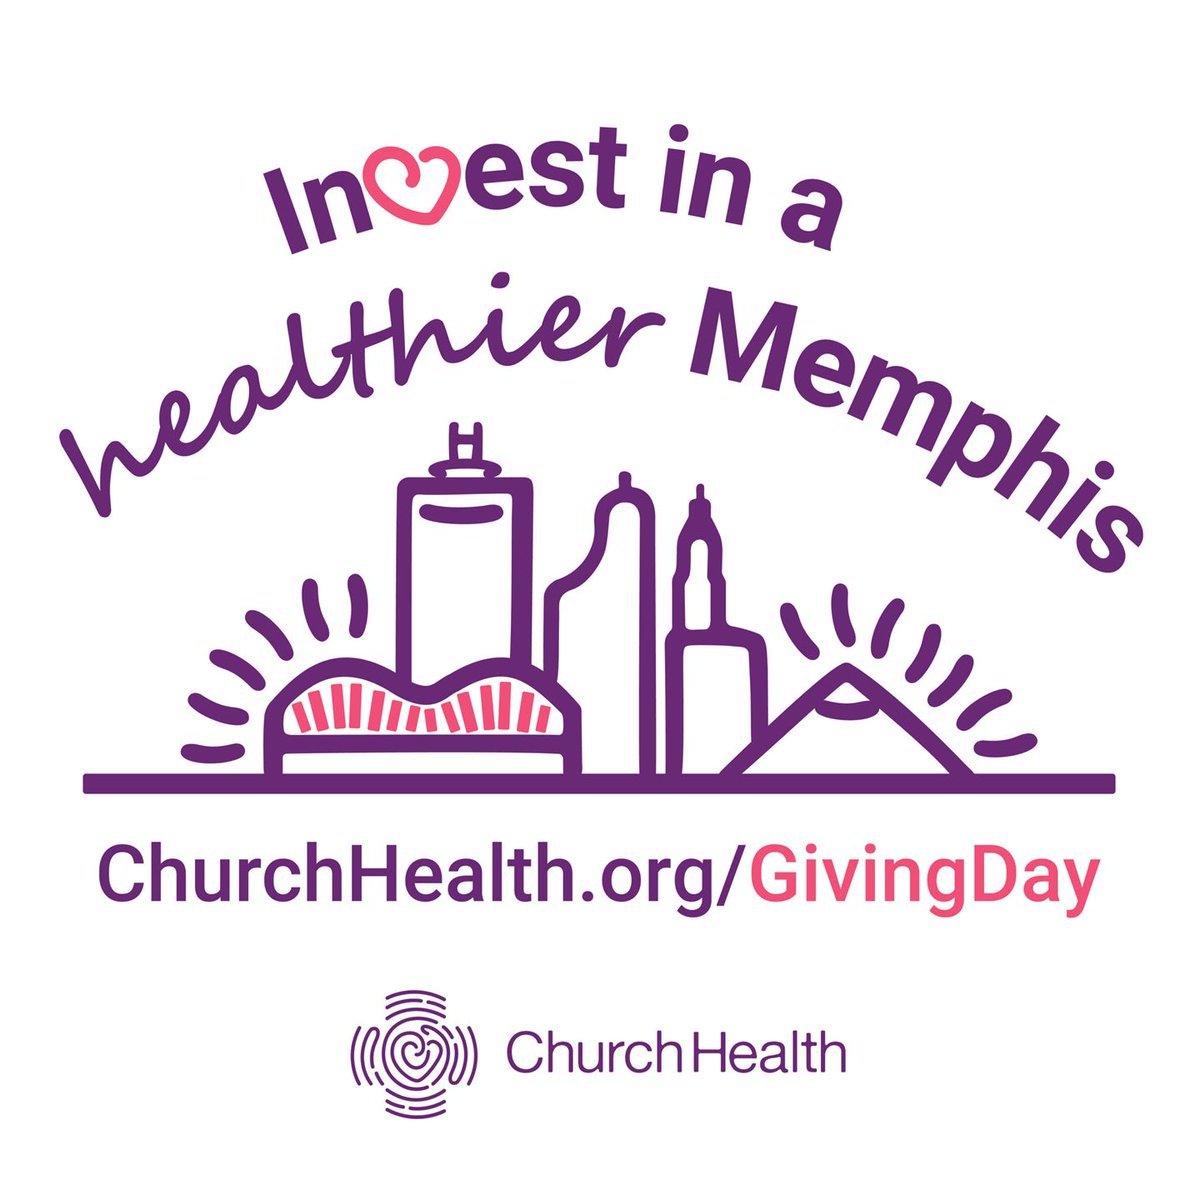 Church Health provides Memphians access to quality health care we all need to live our lives with dignity. Join @901Fund in supporting this meaningful cause. Donations made today, 7/26, Giving Day, will be matched! #doubletheimpact #ad @ChurchHealth901 churchhealth.org/givingday/